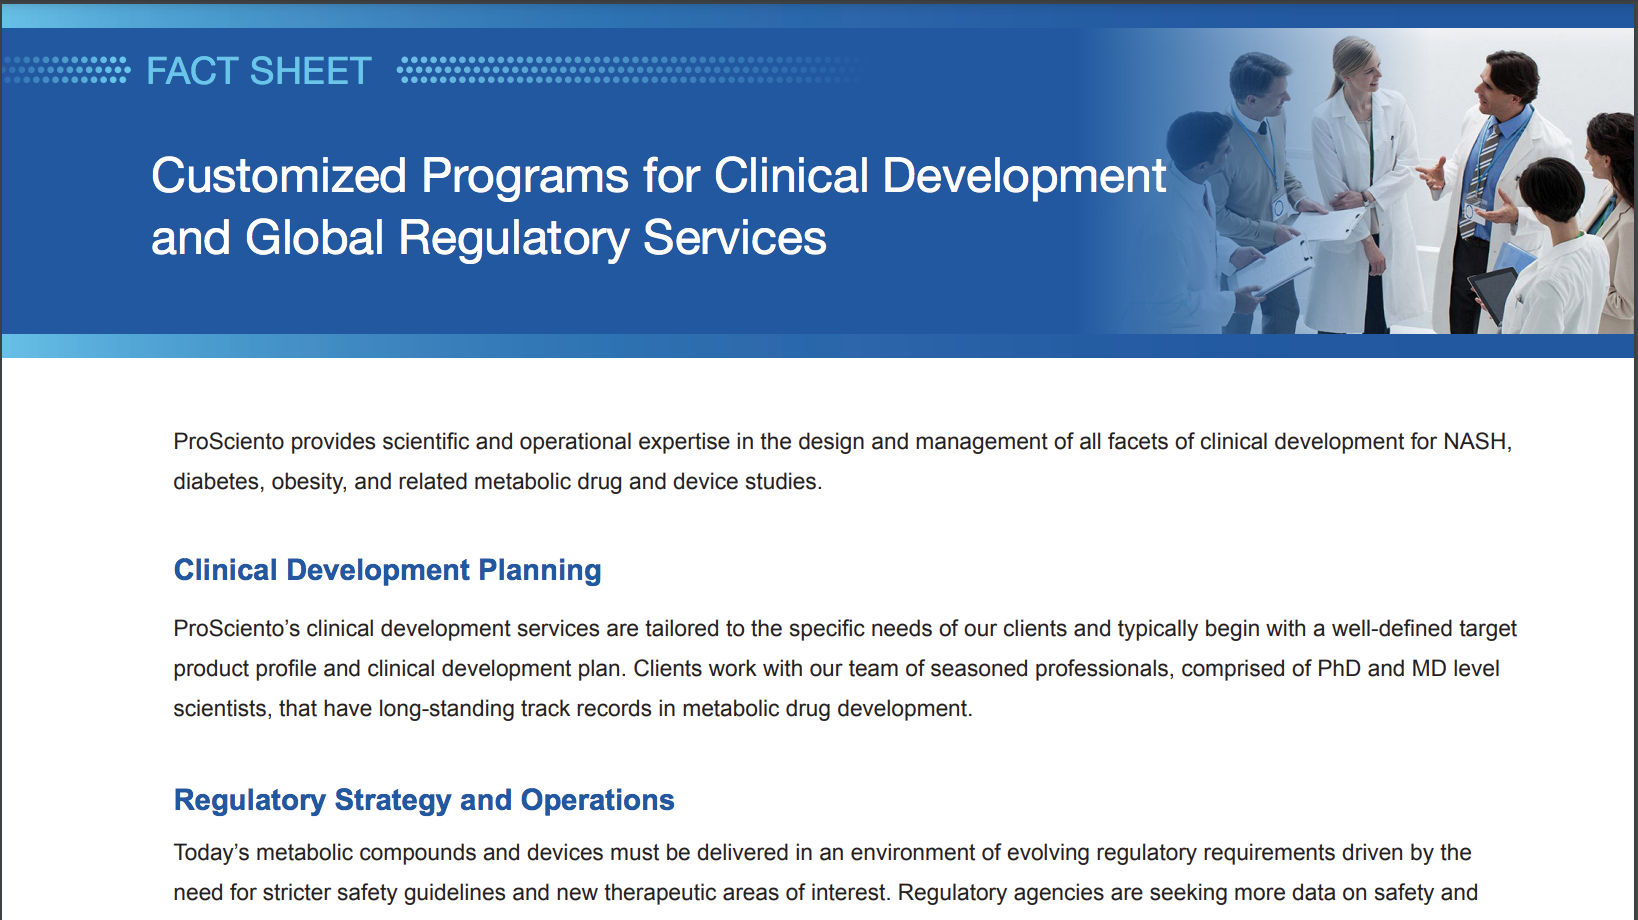 image of Customized Programs for Clinical Development and Global Regulatory Services